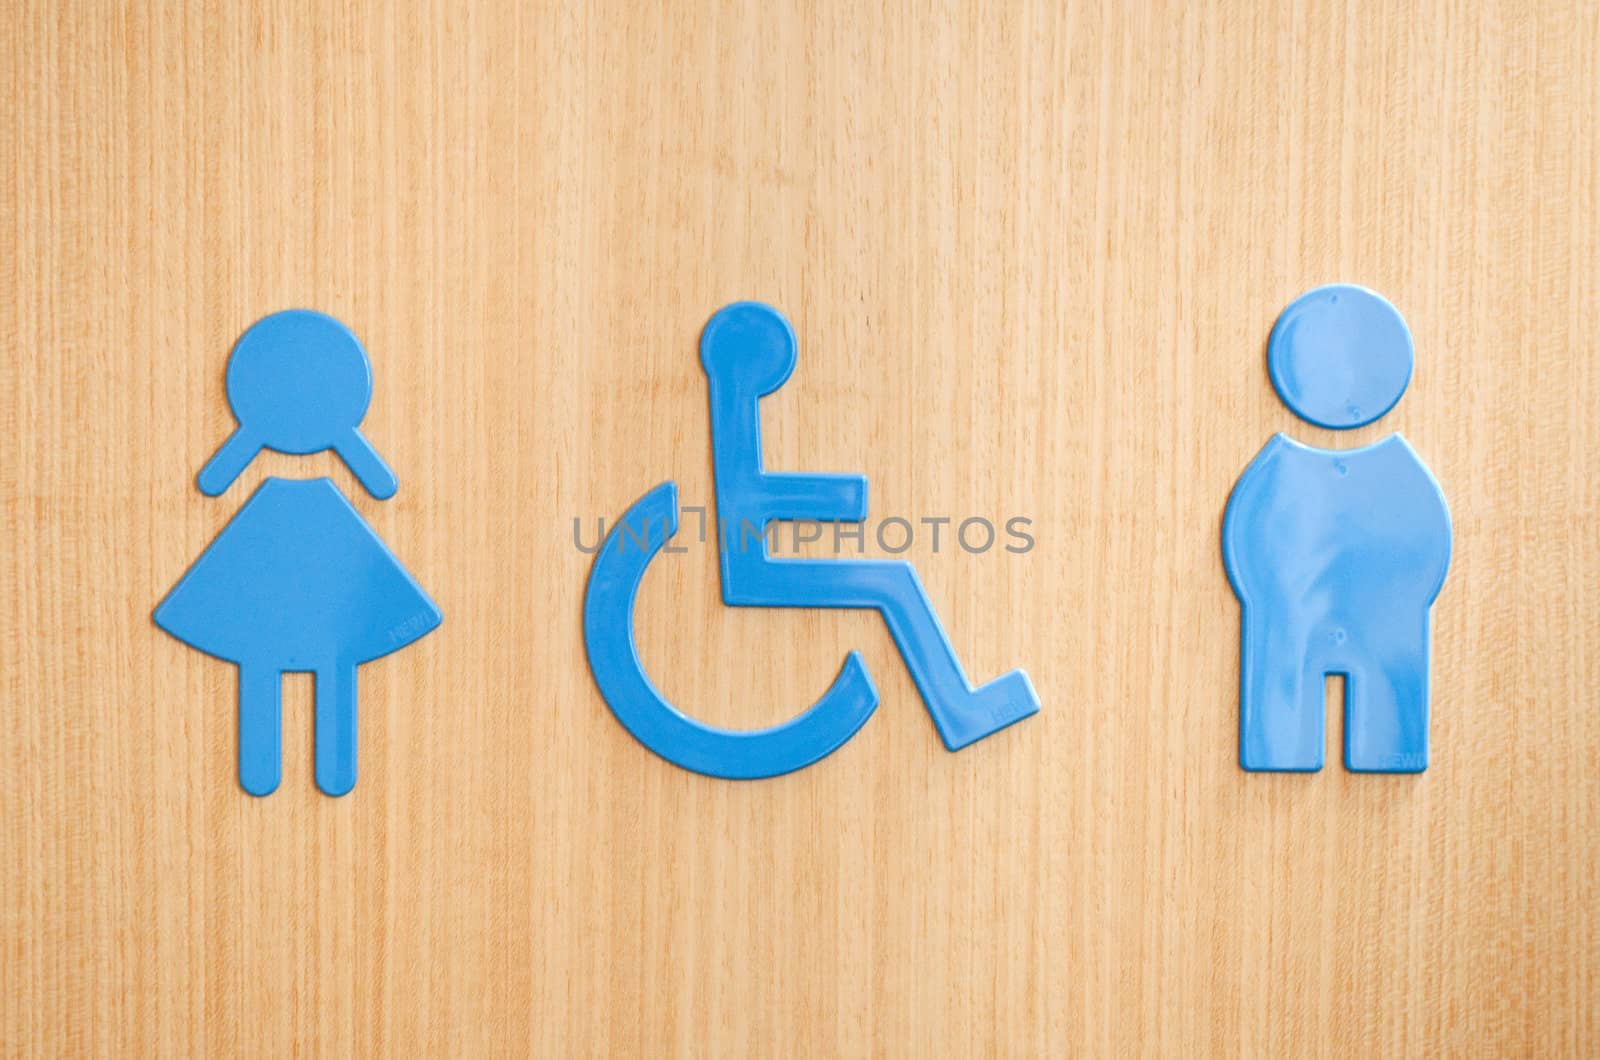 Toilets sign by luissantos84